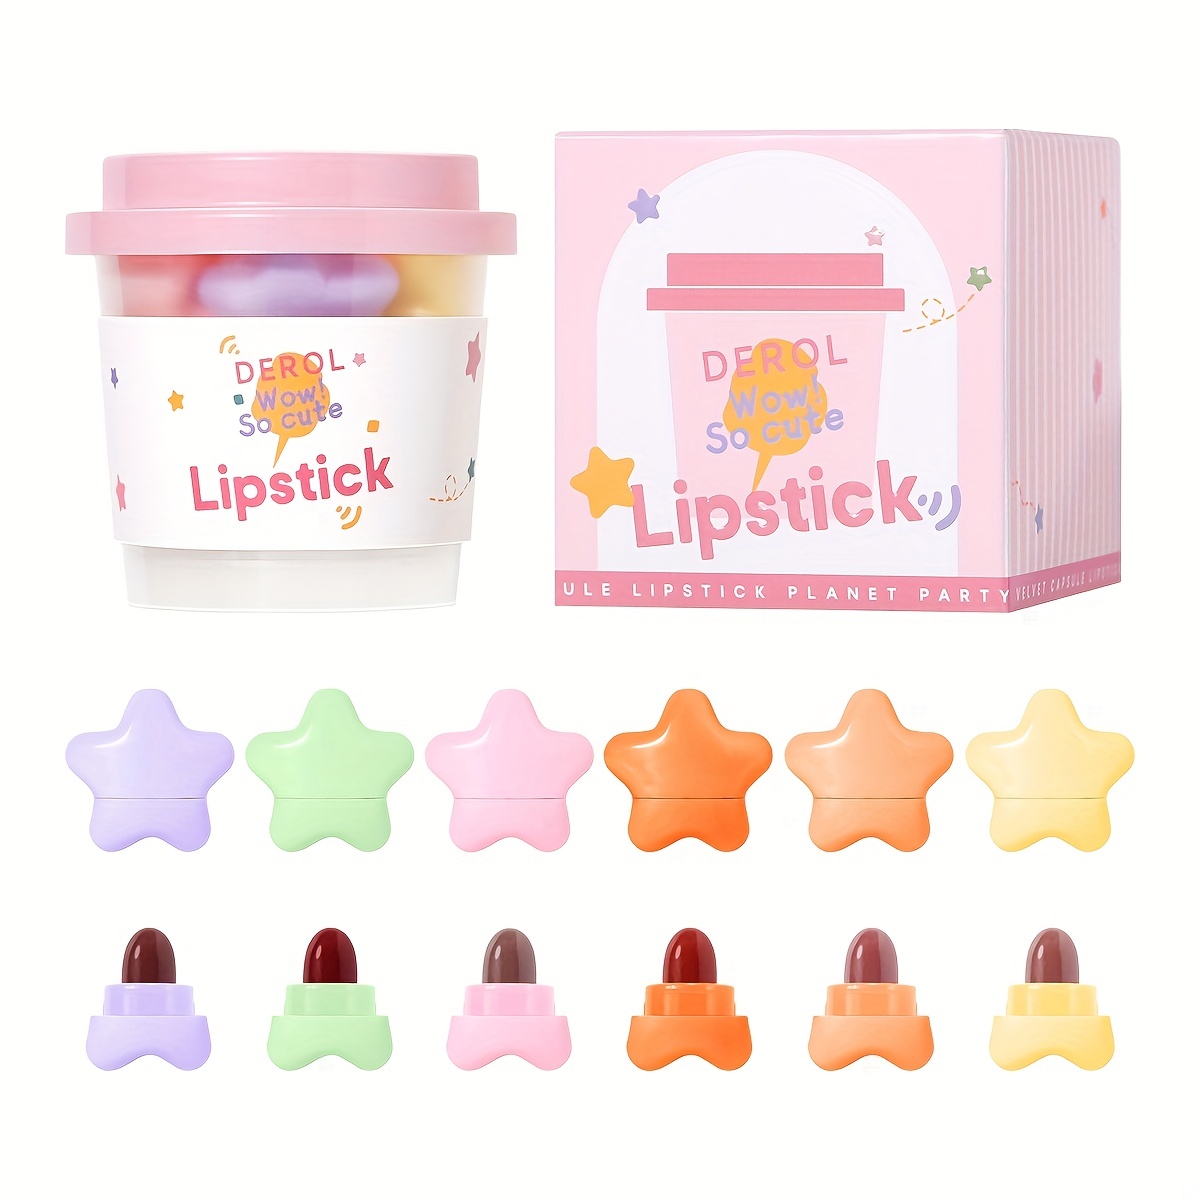 Star Lipstick Velvet Soft Mist 6 Colors In A Mini Mik Tea Cup Colorful Cute  Gift For Girls And Women Valentines Day Gifts, Shop Now For Limited-time  Deals